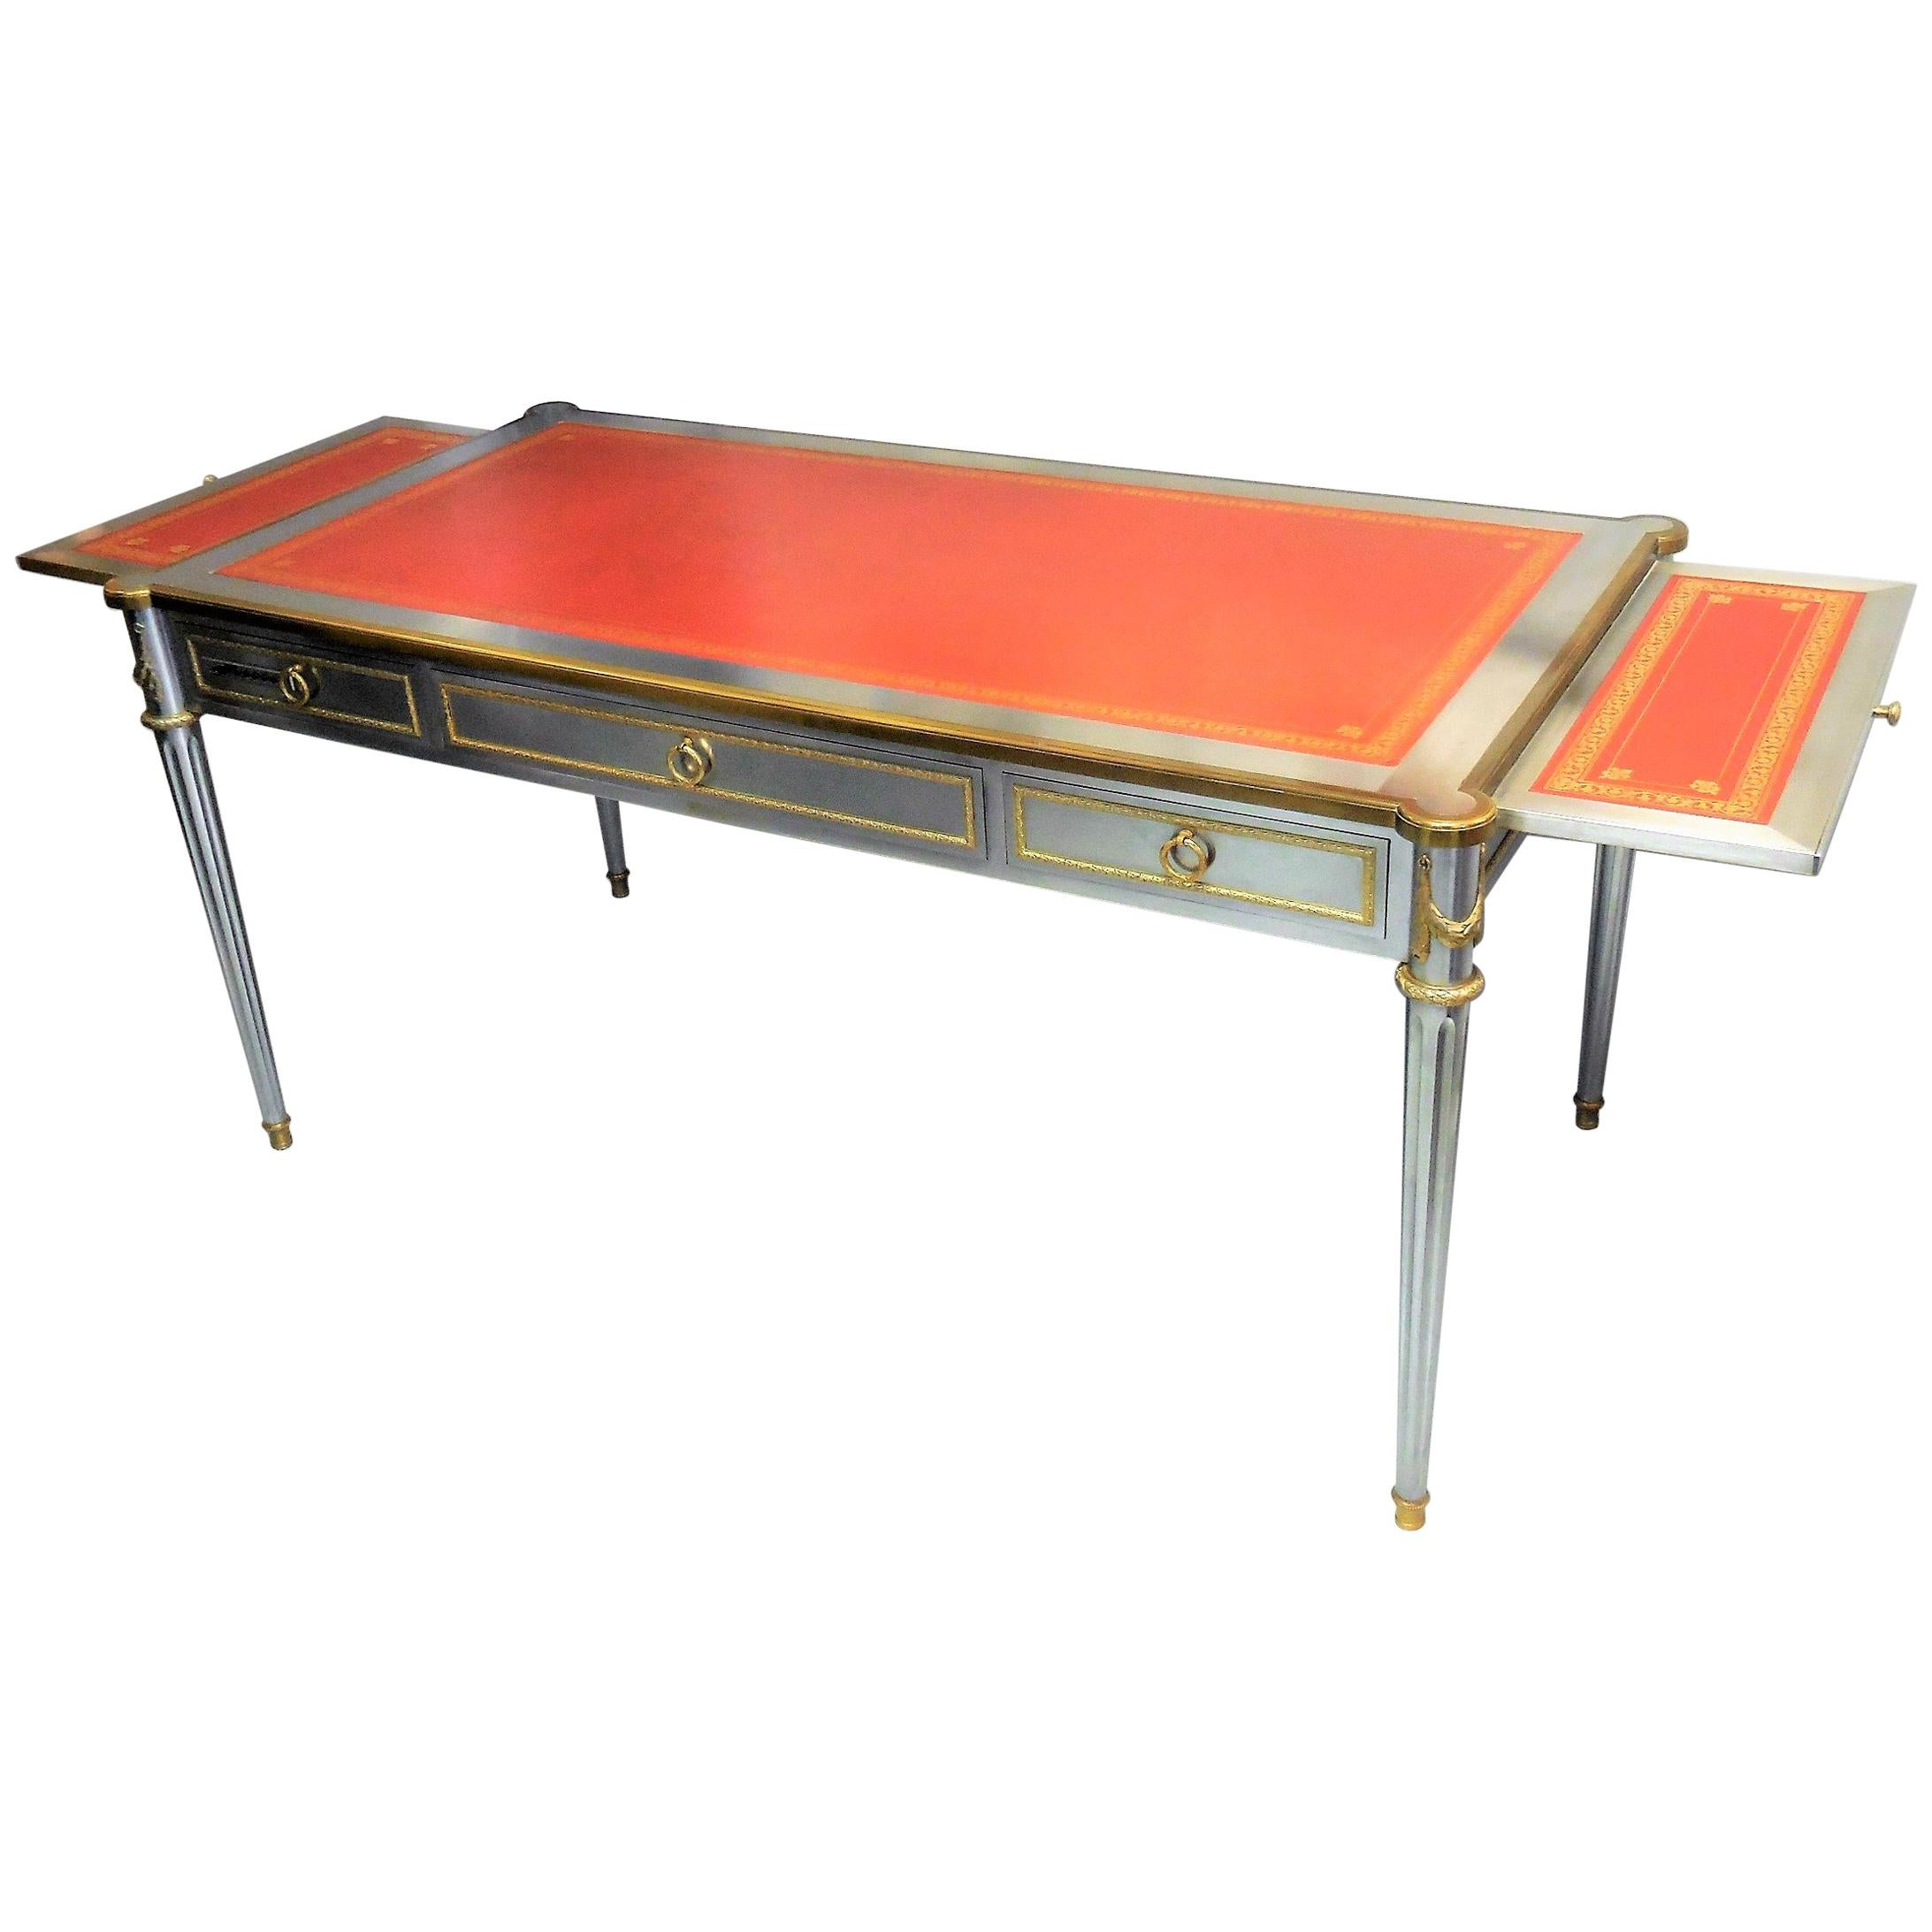 John Vesey V-60 Stainless Steel Bronze and Red Leather Desk, 1960s For Sale